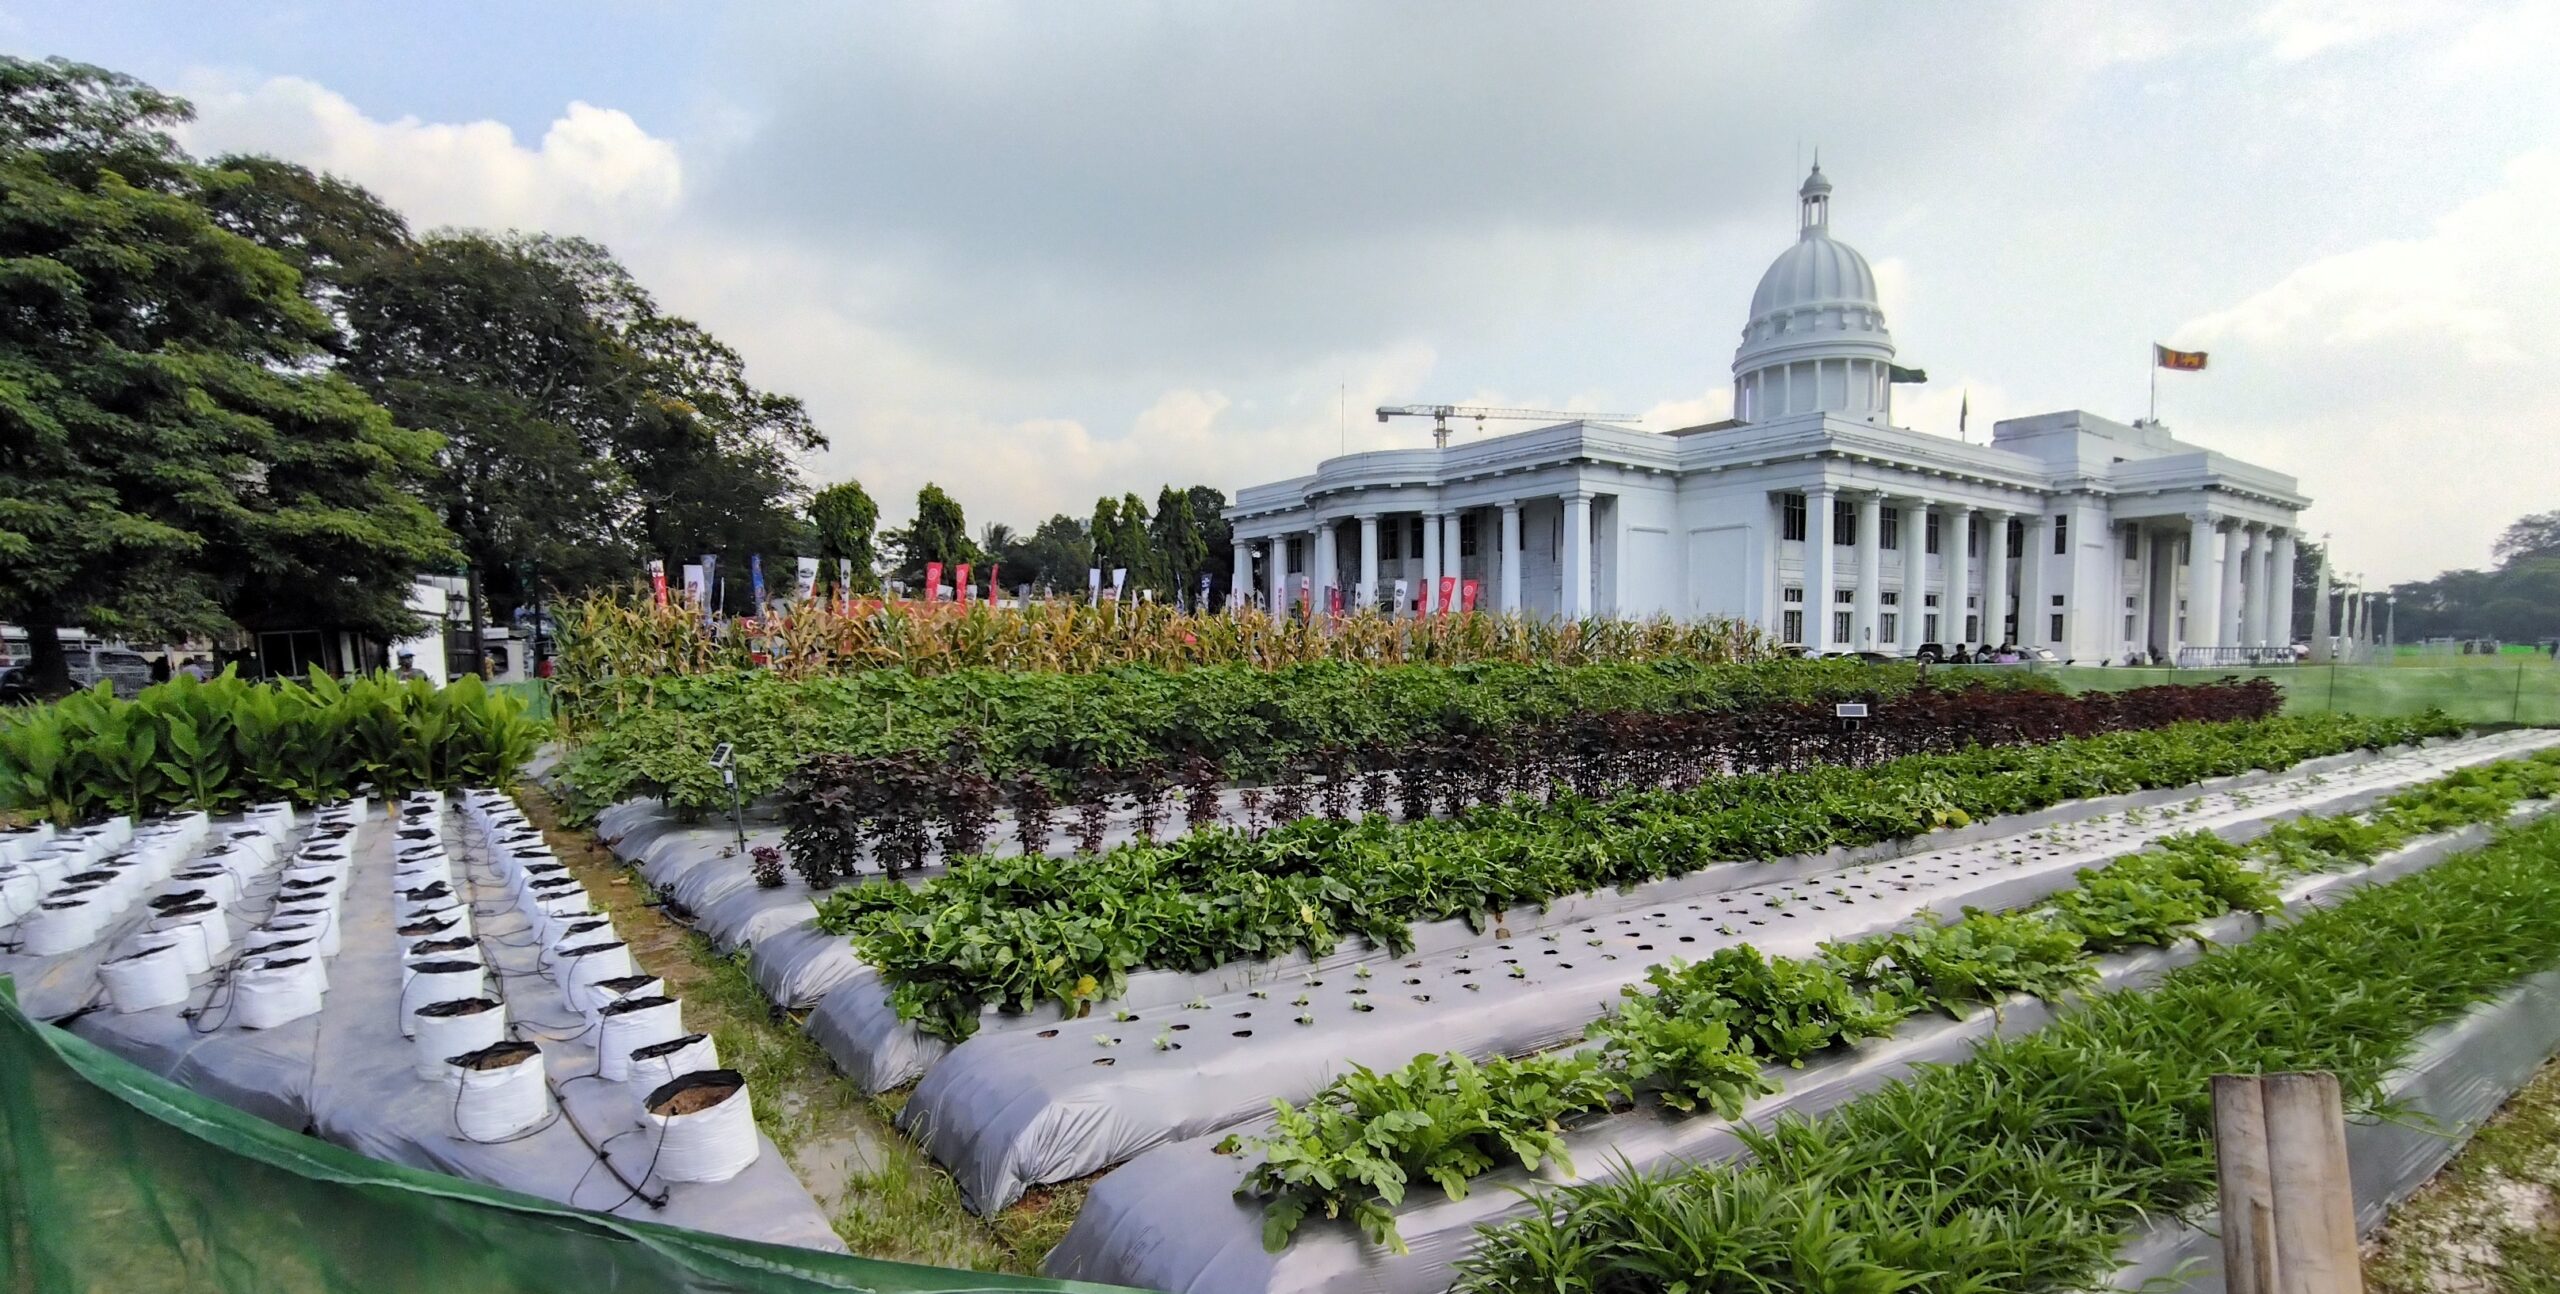 Urban agriculture during economic crisis: Lessons from Cuba, Sri Lanka and Ukraine